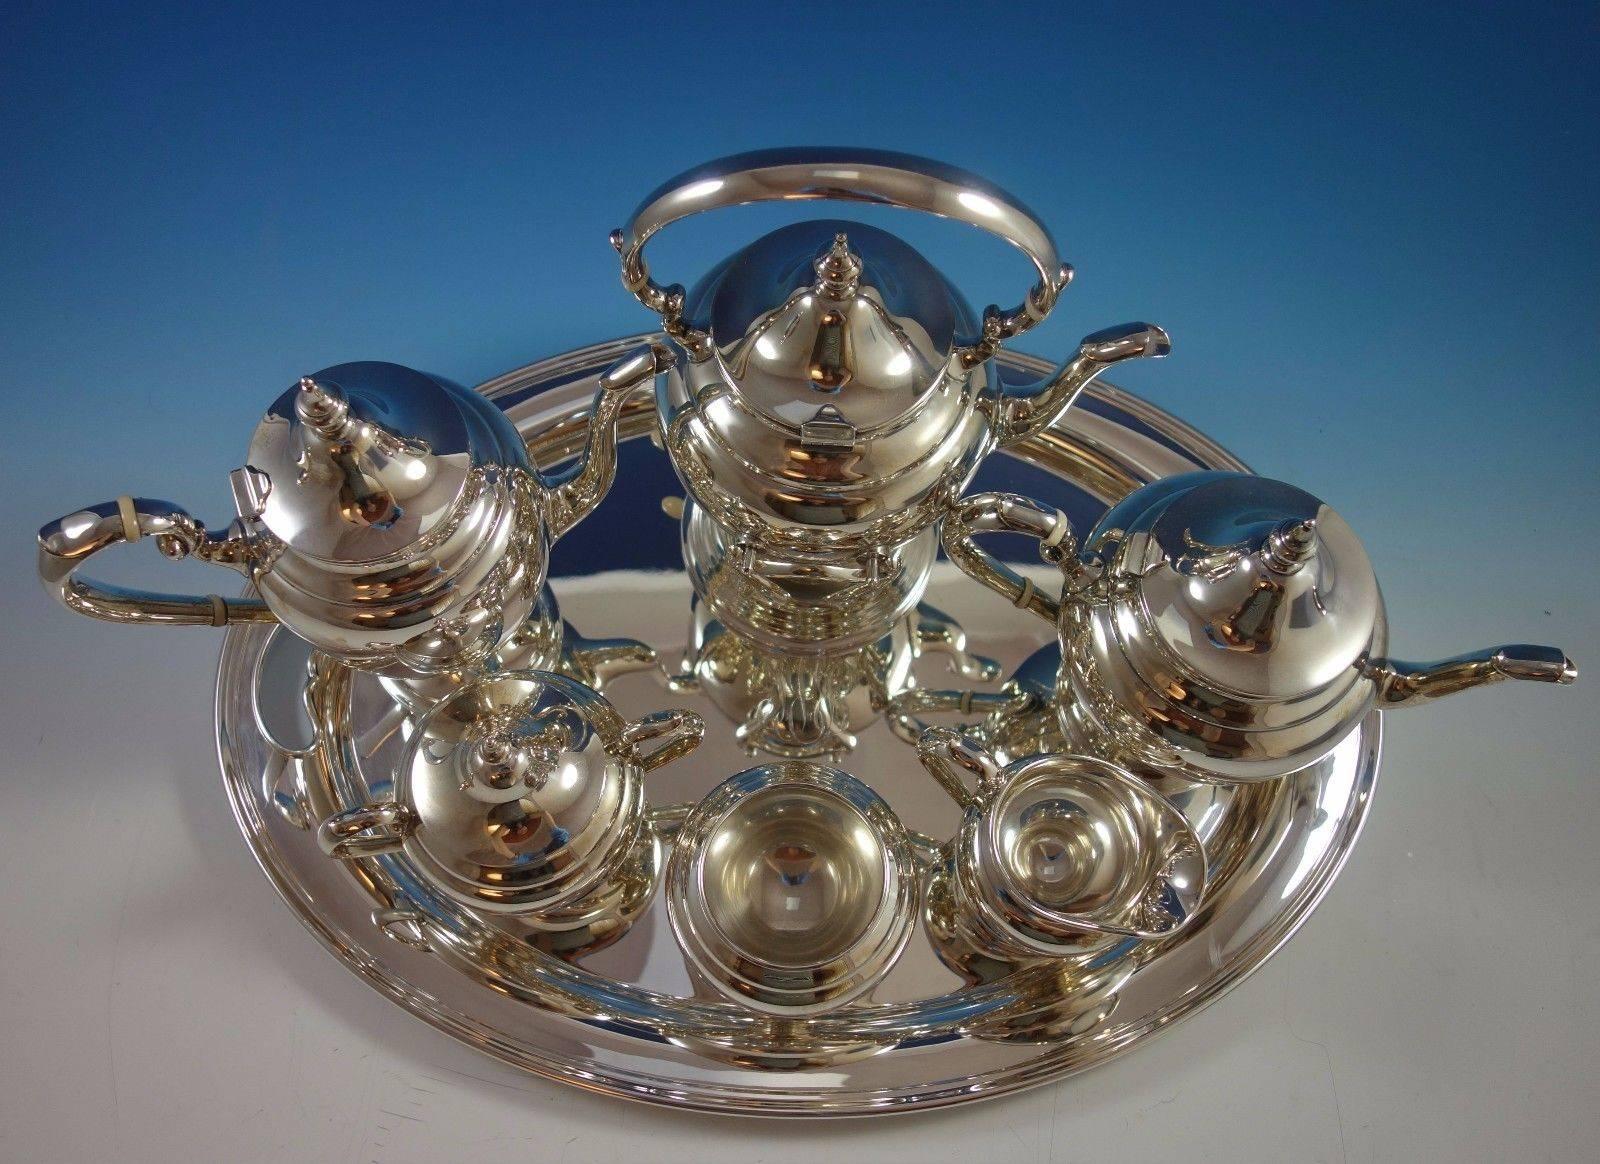 Beautiful Puritan by Gorham sterling silver six-piece tea set with an elegant oval tray. The tea set is not monogrammed, but the tray has a scroll mono “BRL” (see photos). The tray is marked #495, measures 22" x 16" x 3/4", and weighs